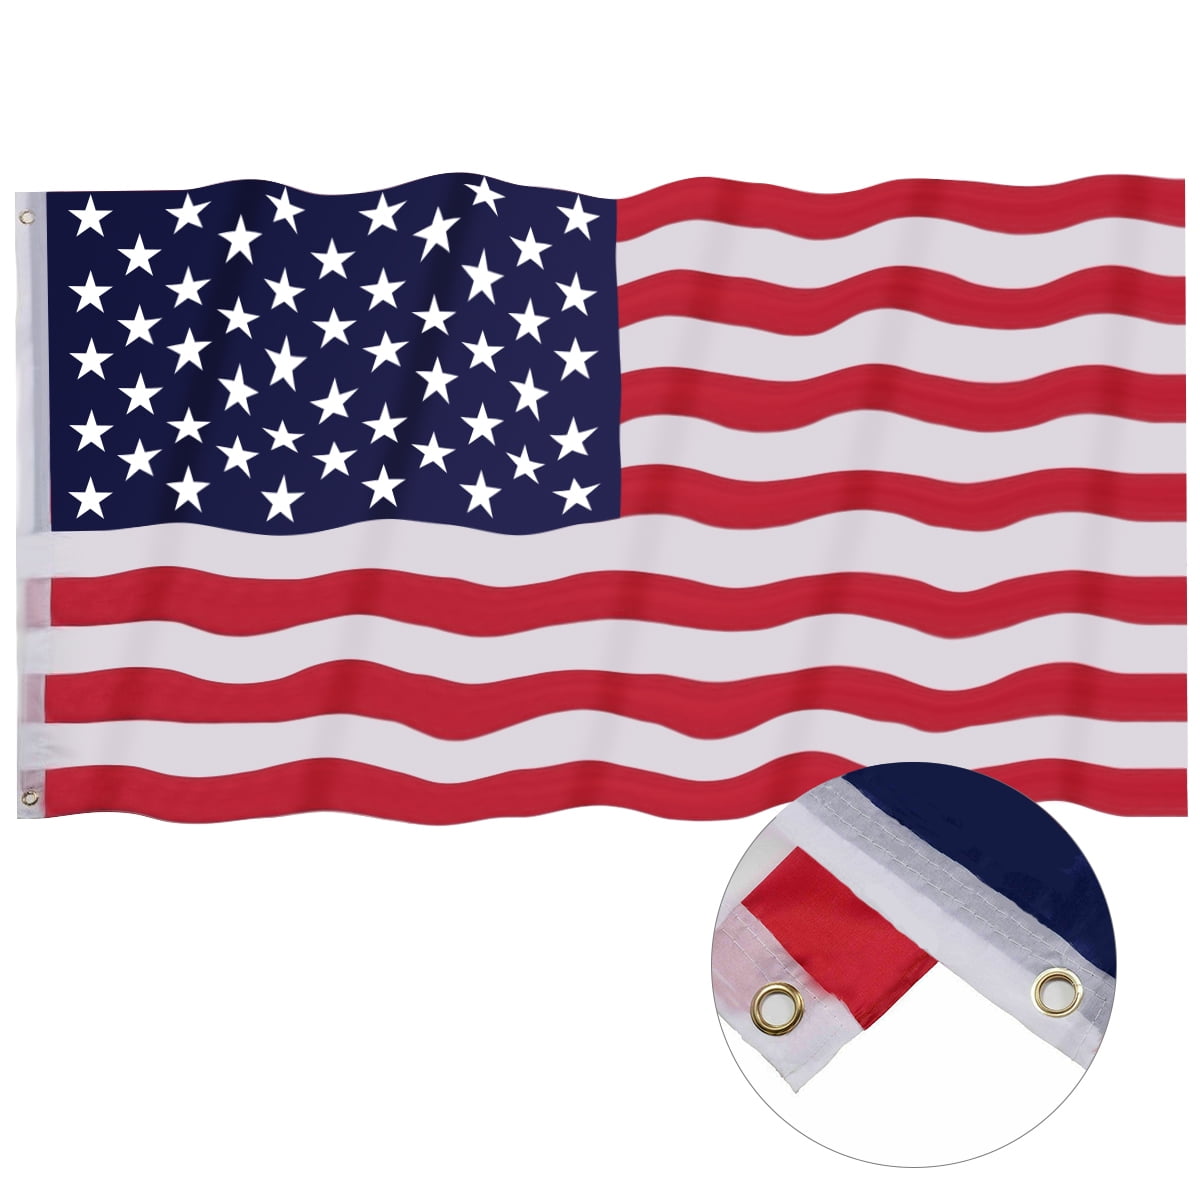 United States of America Flag NEW 3'x5' Polyester USA 